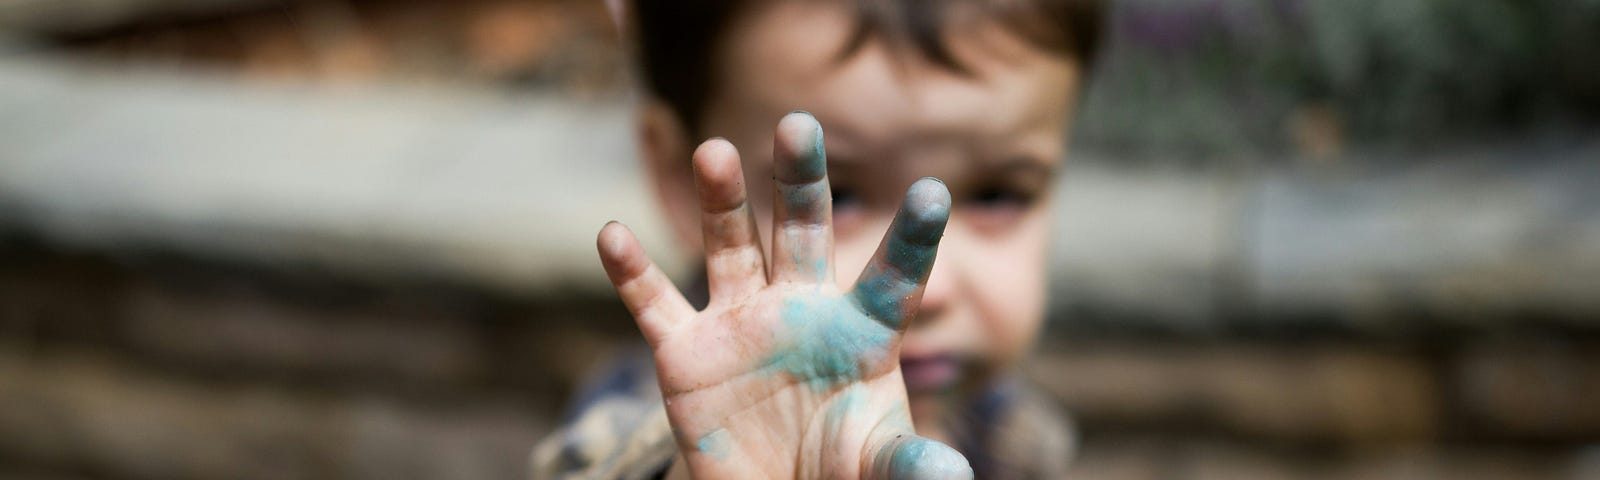 Portrait of toddler boy outside in front of a stone wall with stained blue hand reaching out towards the camera. The hand is in focus, the child’s face is out of focus and partially blocked by his hand.